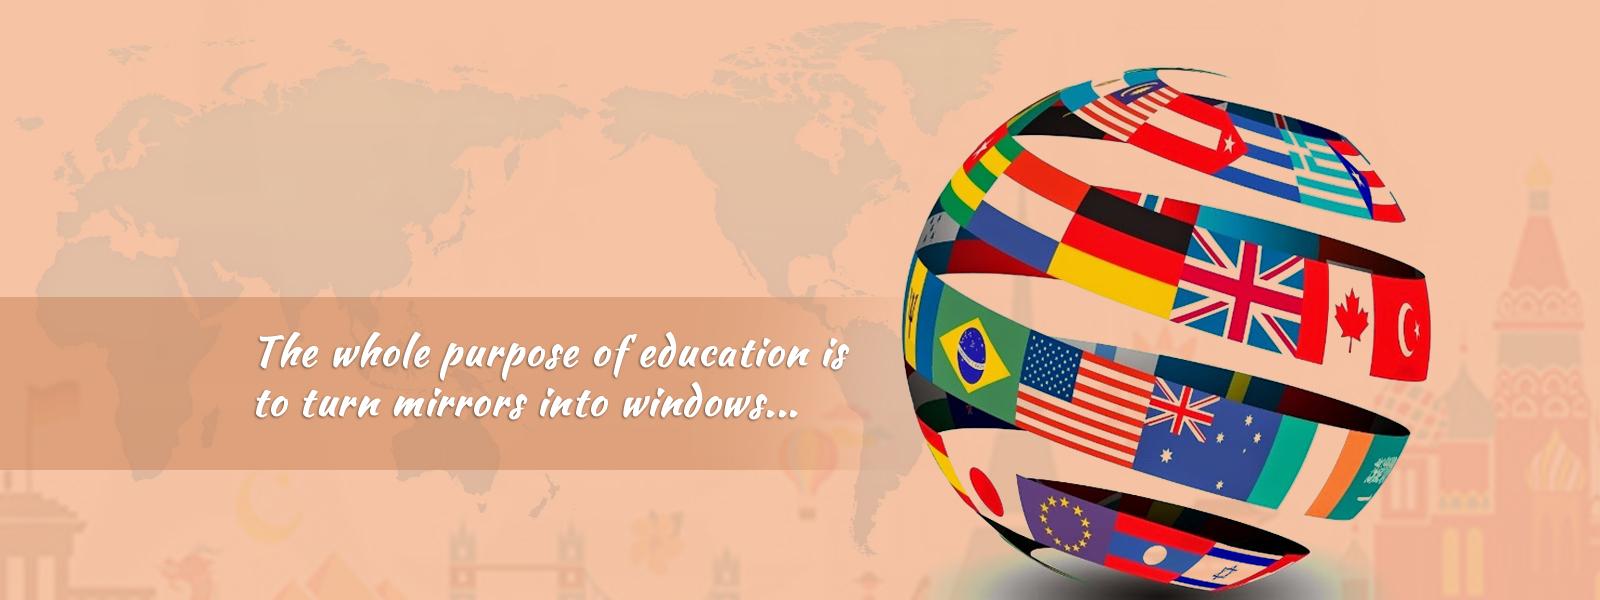 one stop hub for global education and career needs